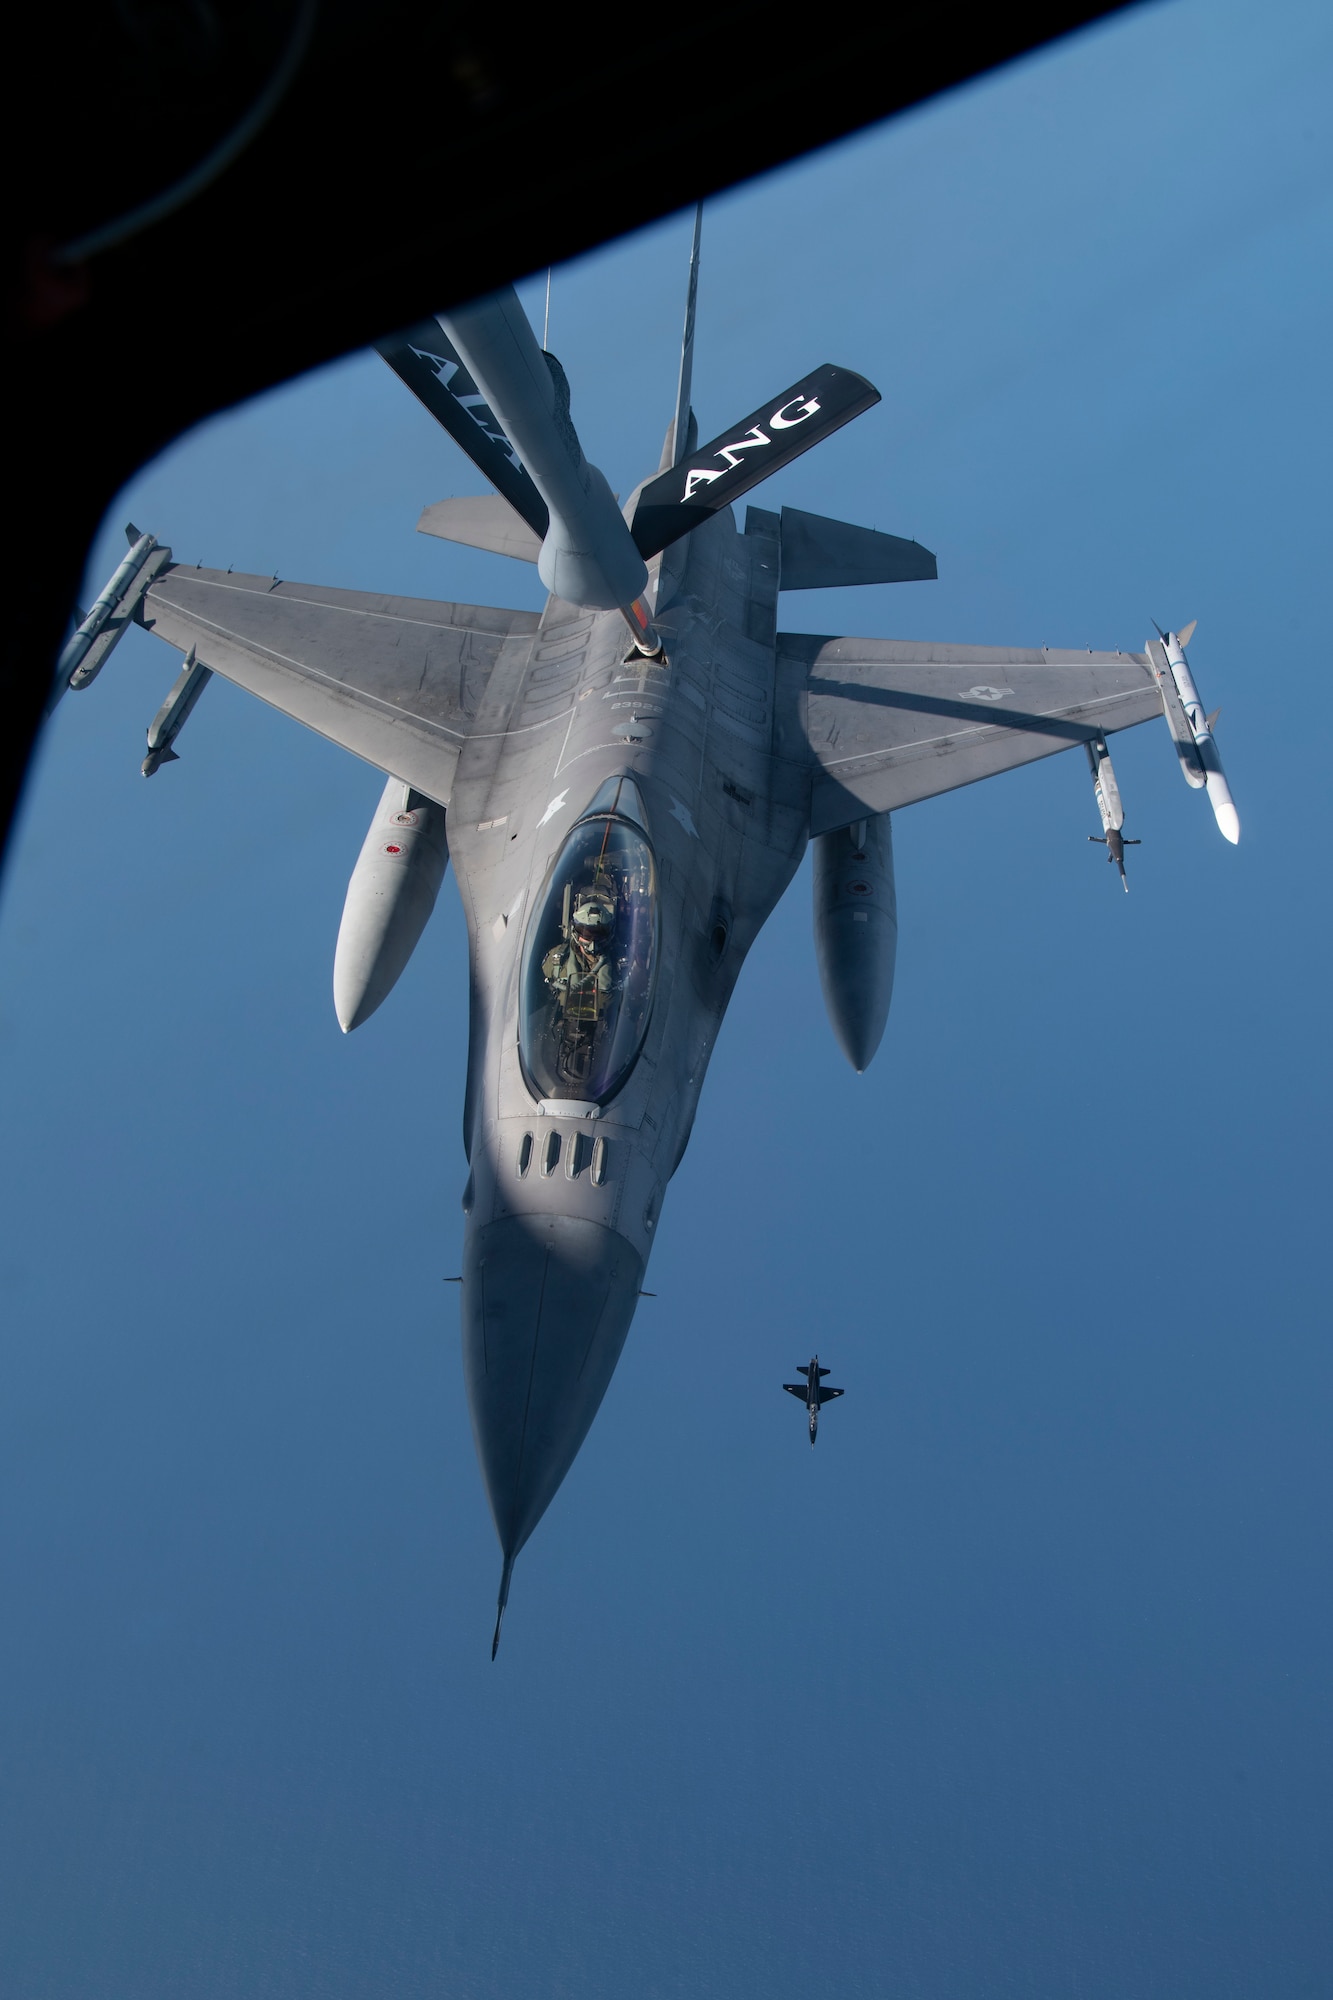 A U.S. Air Force F-16 Fighting Falcon with the 169th Fighter Wing, in-flight refuels from a KC-135 Stratotanker with the 117th Air Refueling Wing, during exercise Sentry Savannah May, 5, 2022, in a military operations area off the coast of Georgia. Sentry Savannah is a joint total force integrated exercise that showcases the nation's combat aircraft readiness, tests the capabilities of our warfighters in a near-peer environment and trains our next generation of fighter pilots for tomorrow’s fight. (U.S. Air Force photo by Staff Sgt. Hanna Smith)